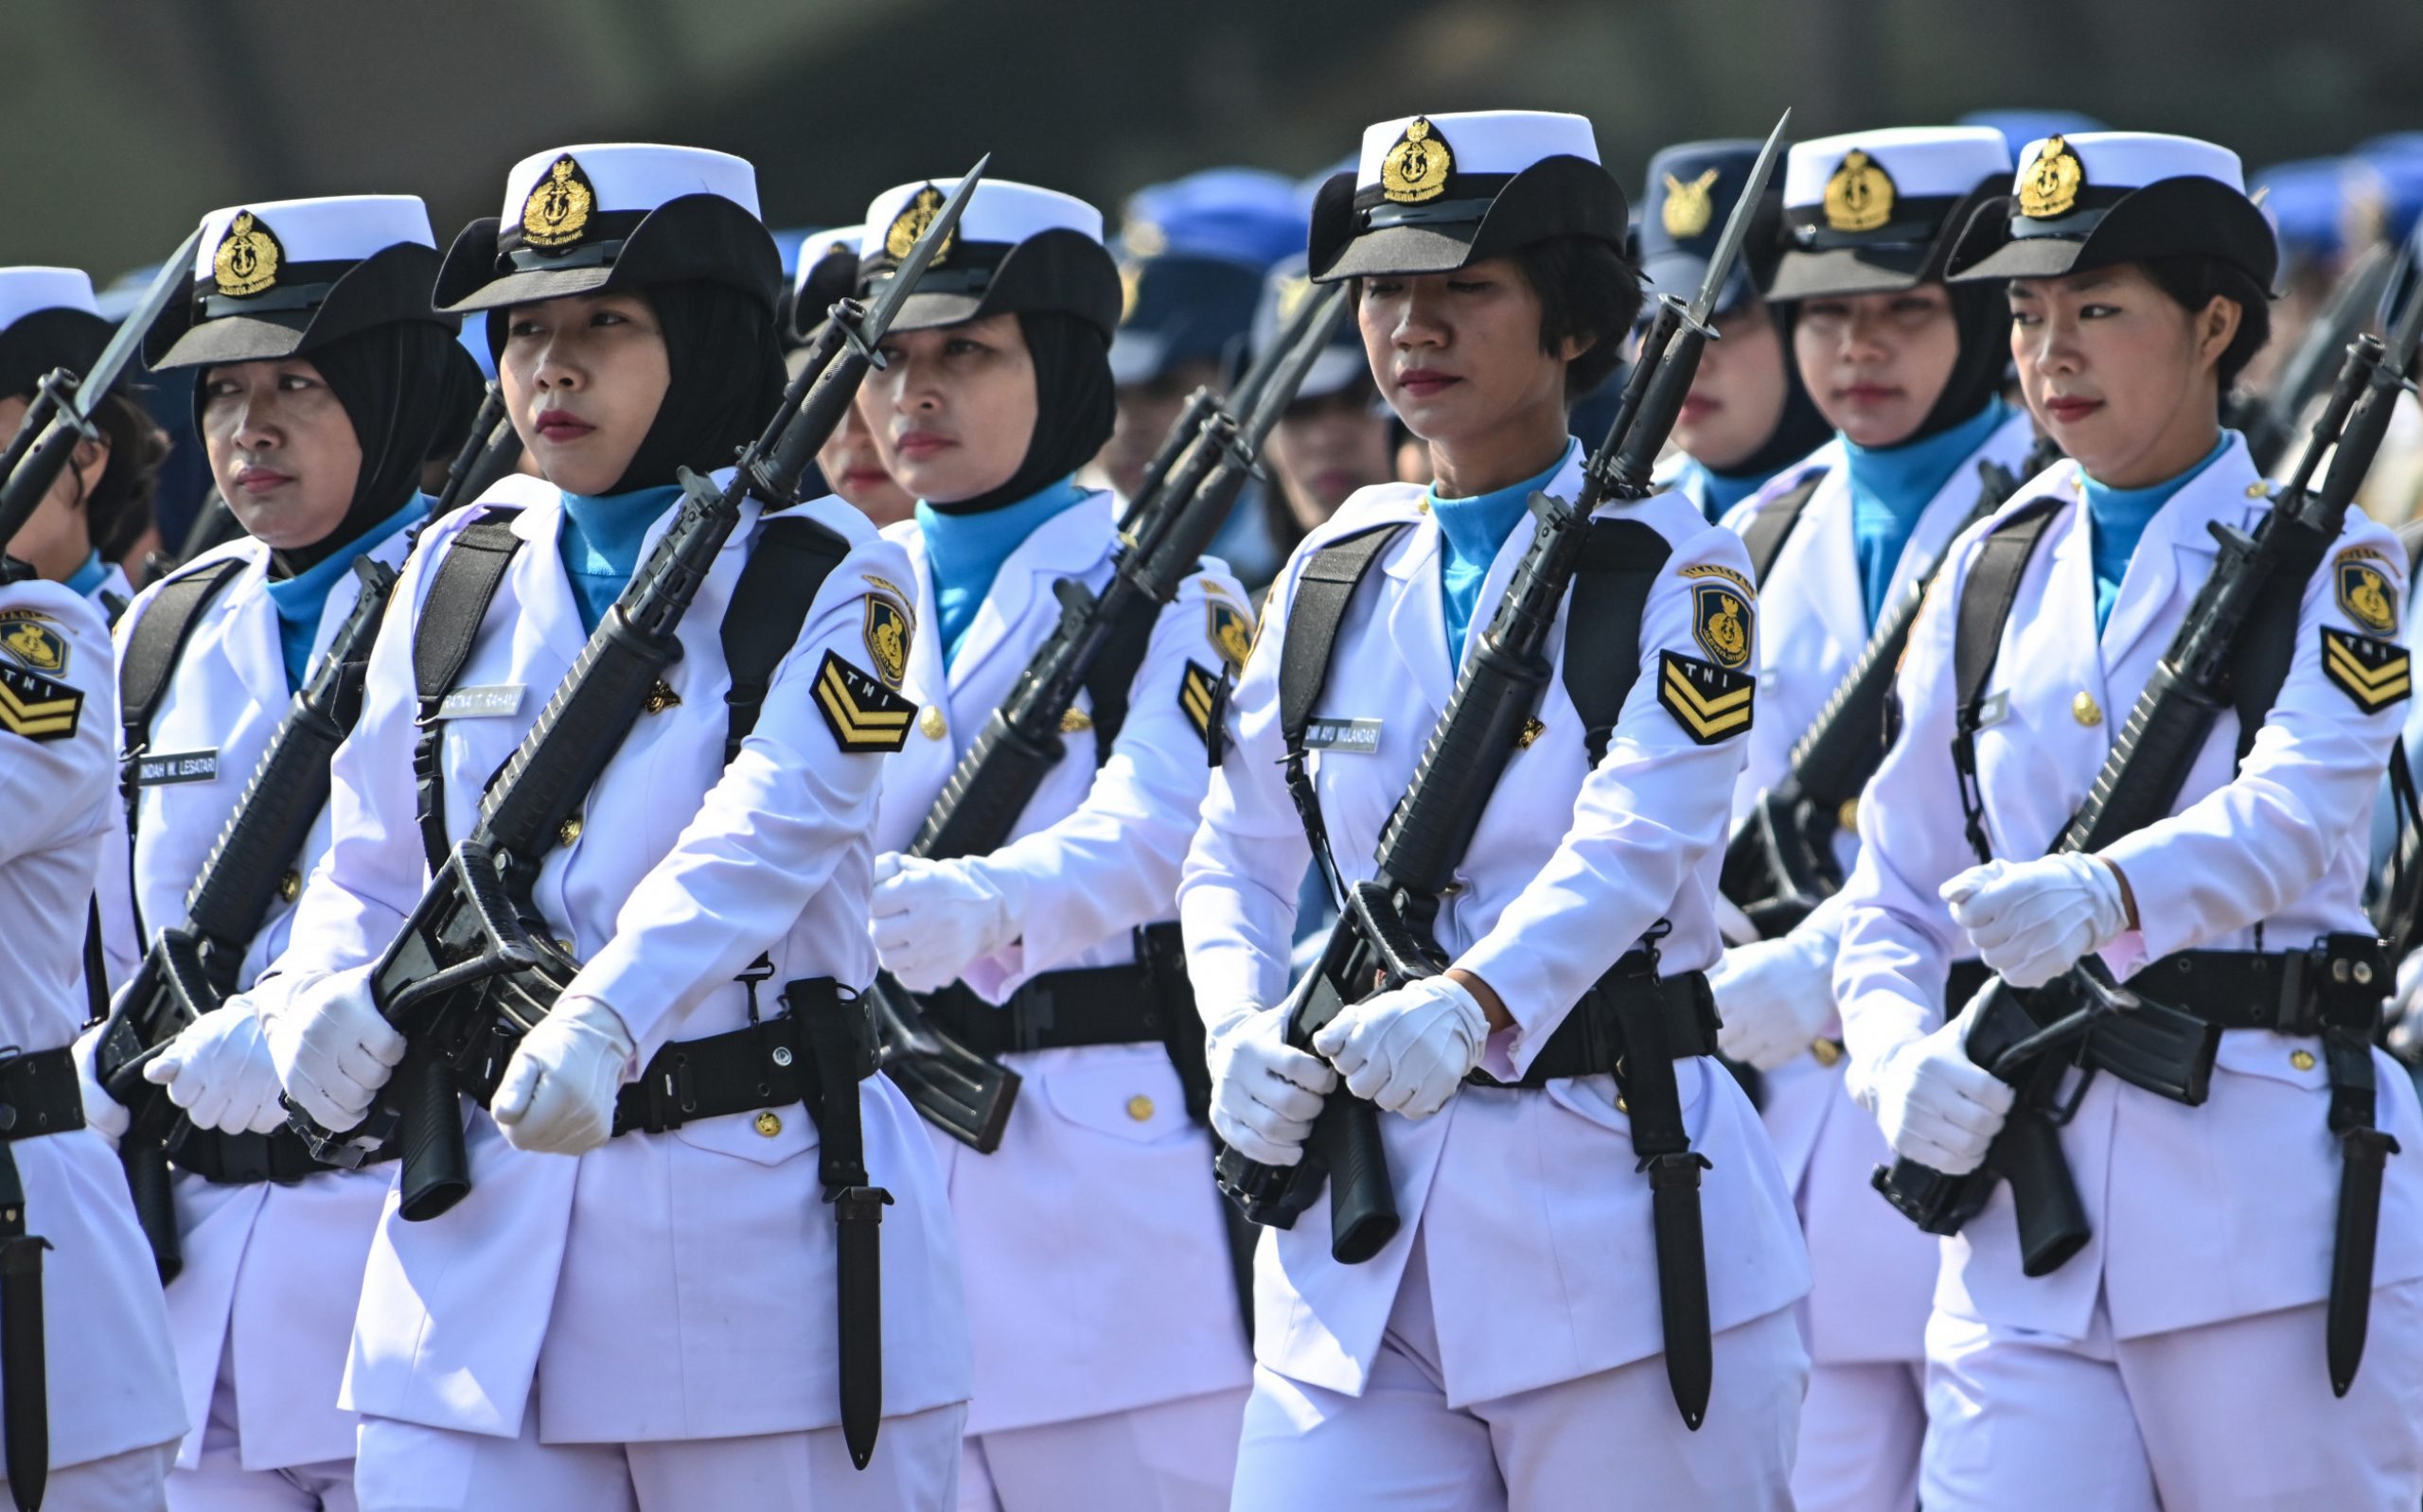 Indonesian Army Ends ‘Two-Finger’ Virginity Tests on Female Recruits